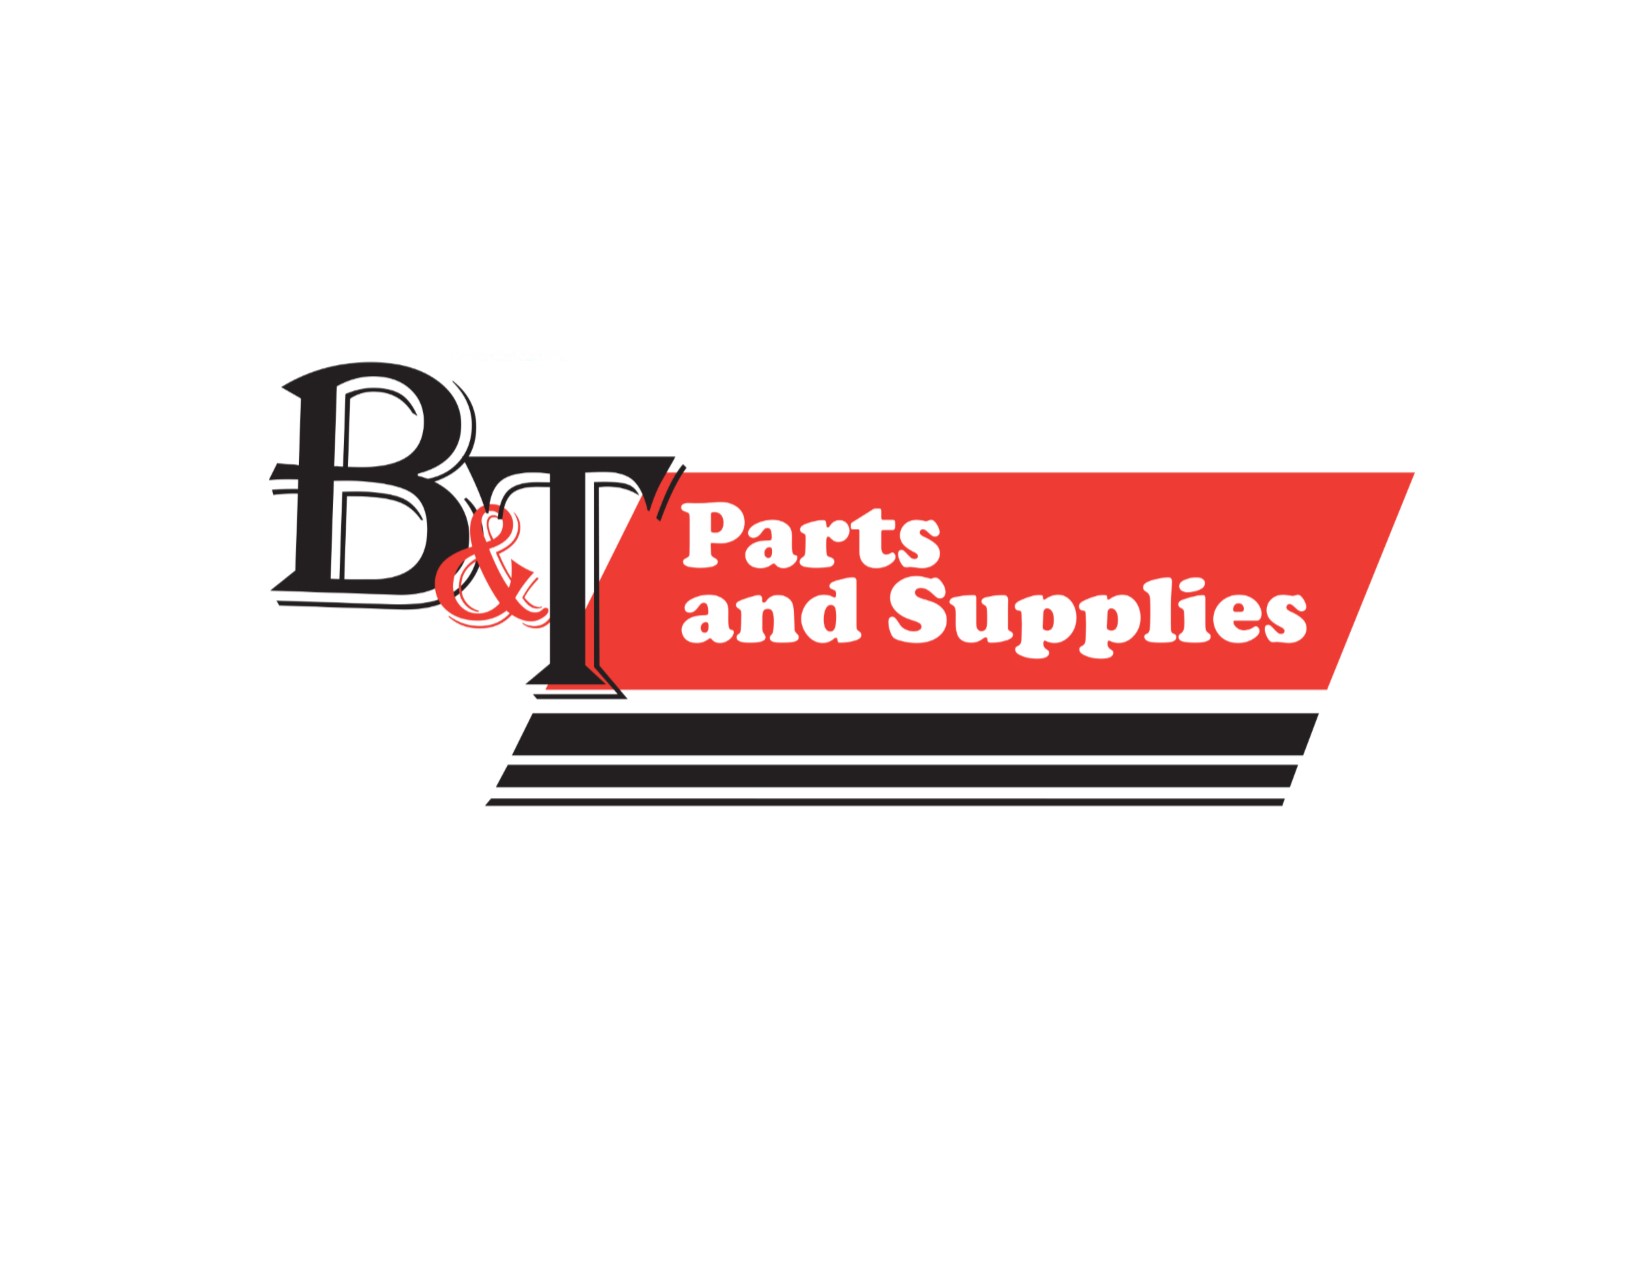 B&T Parts and Supplies